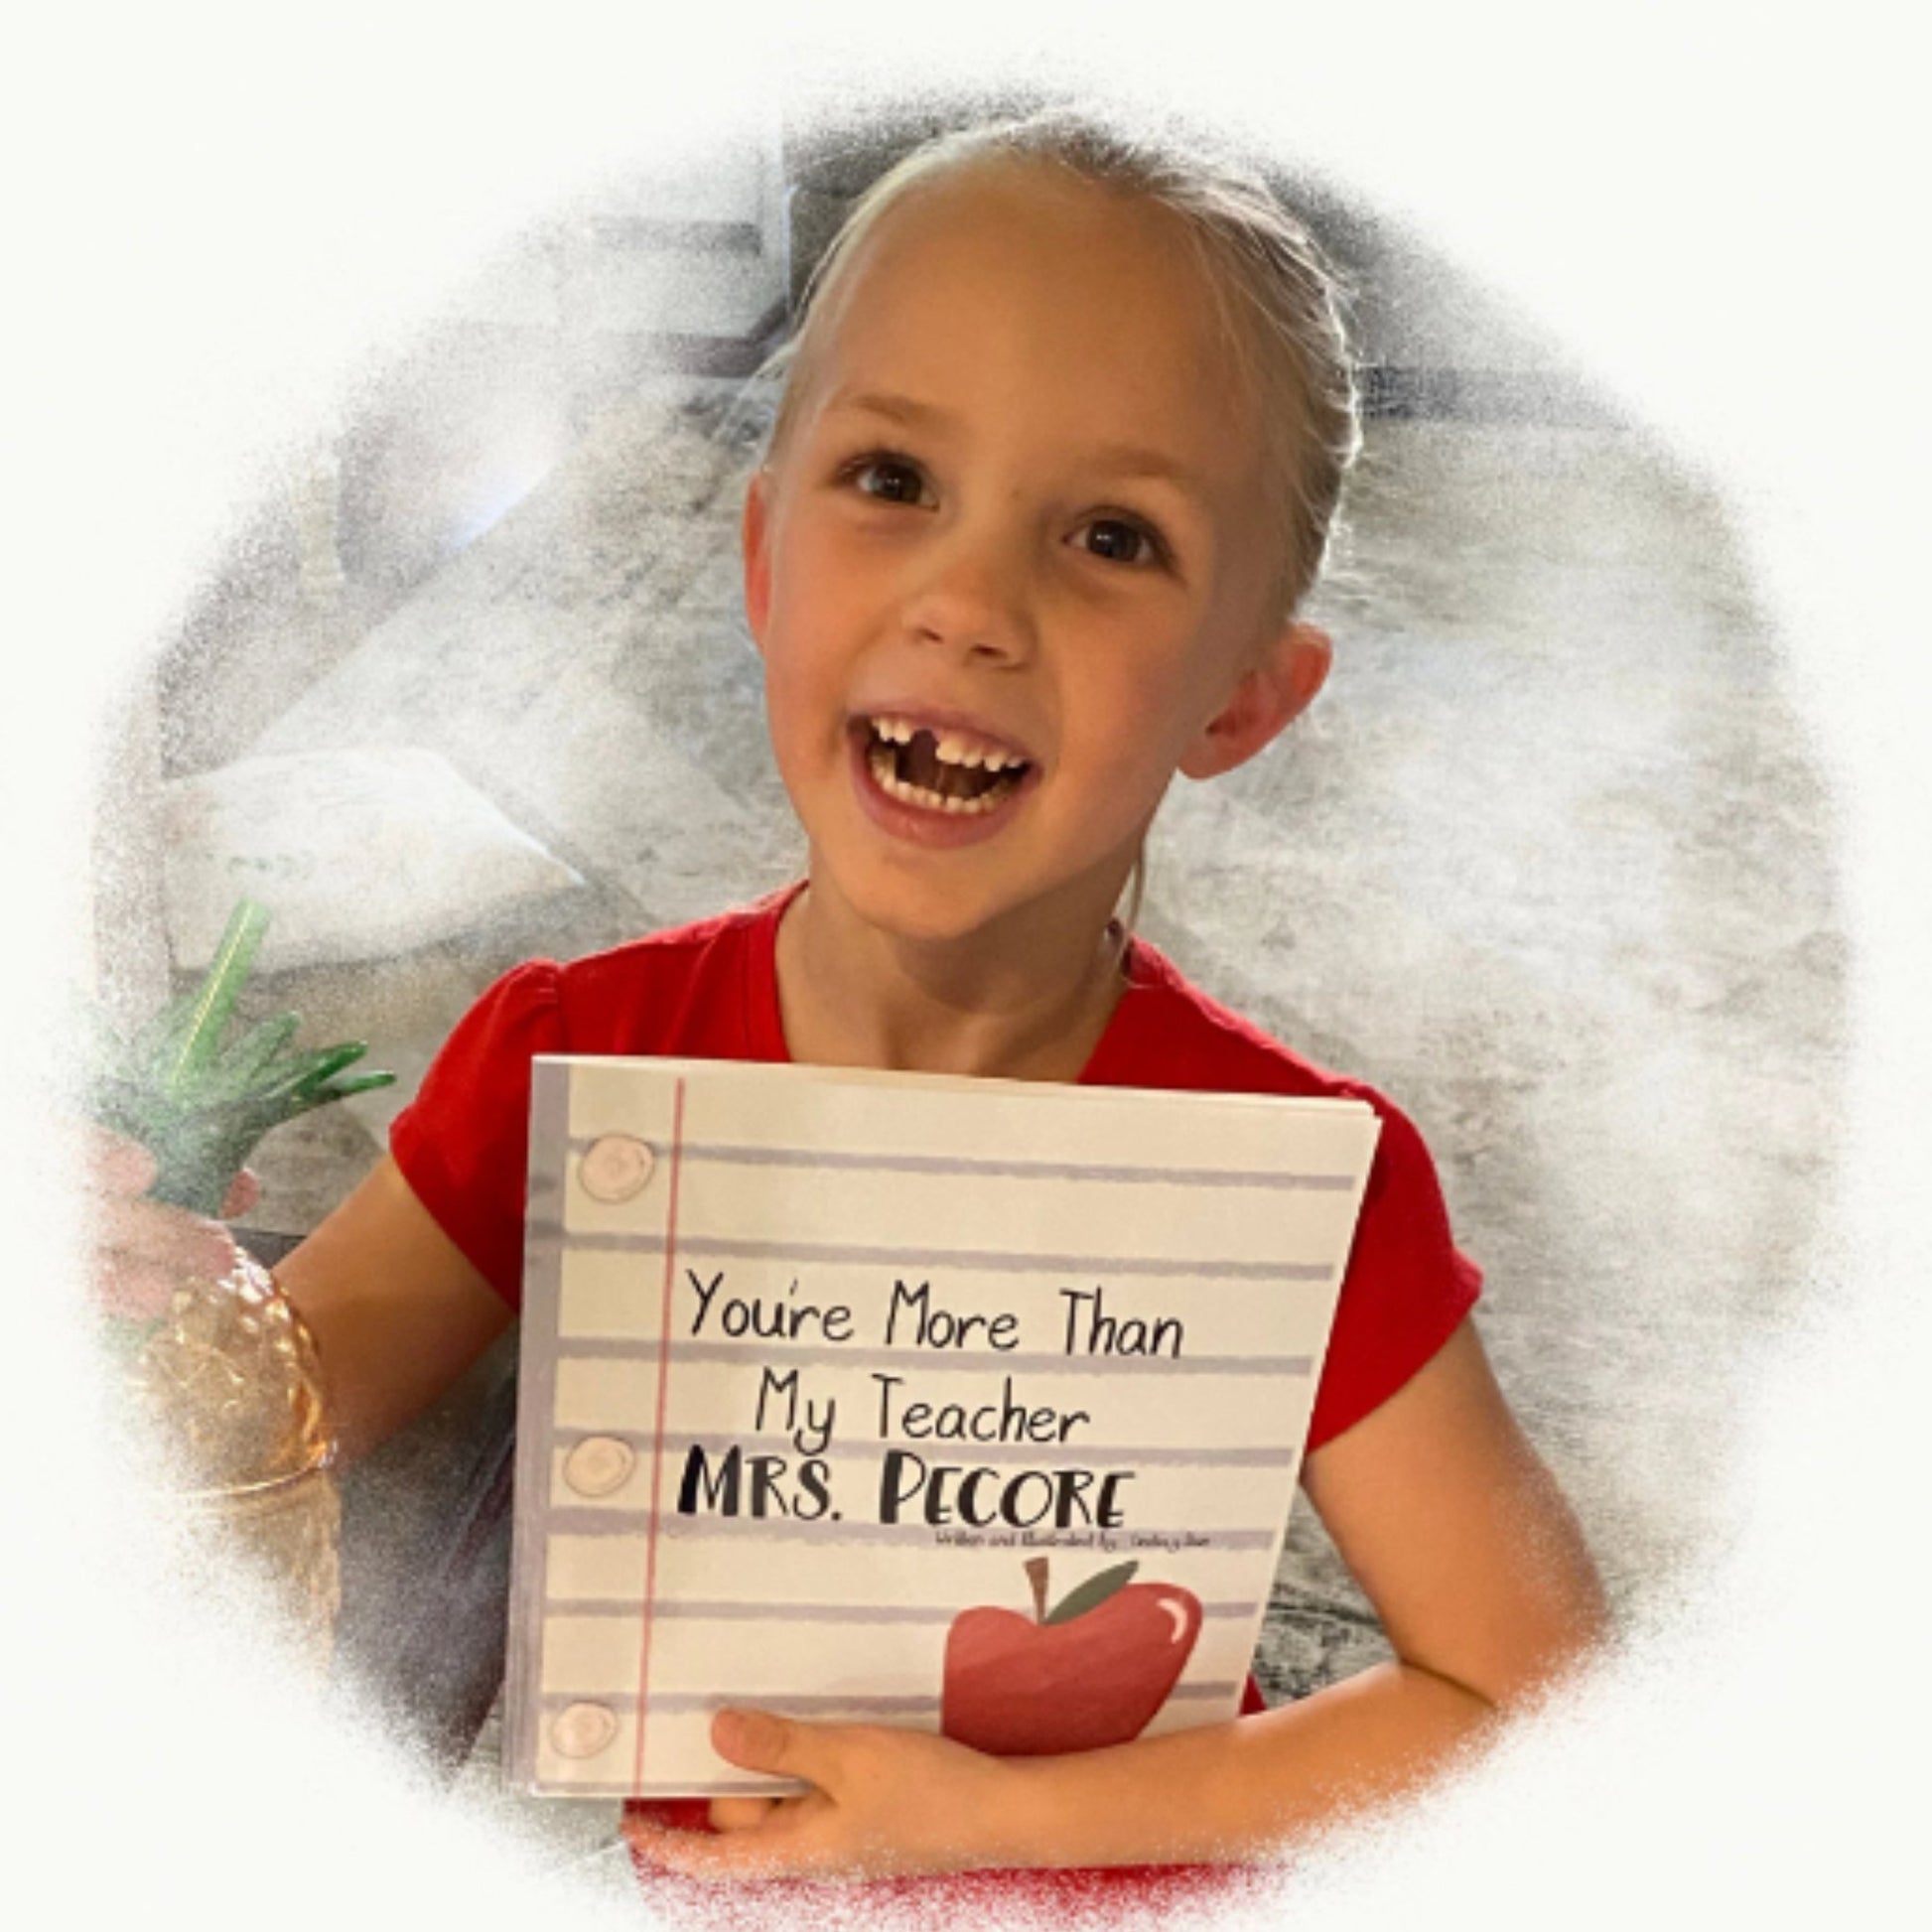 Gift certificate photo of a proud, happy, young girl holding the self-published personalized book called “You’re More Than My Teacher”